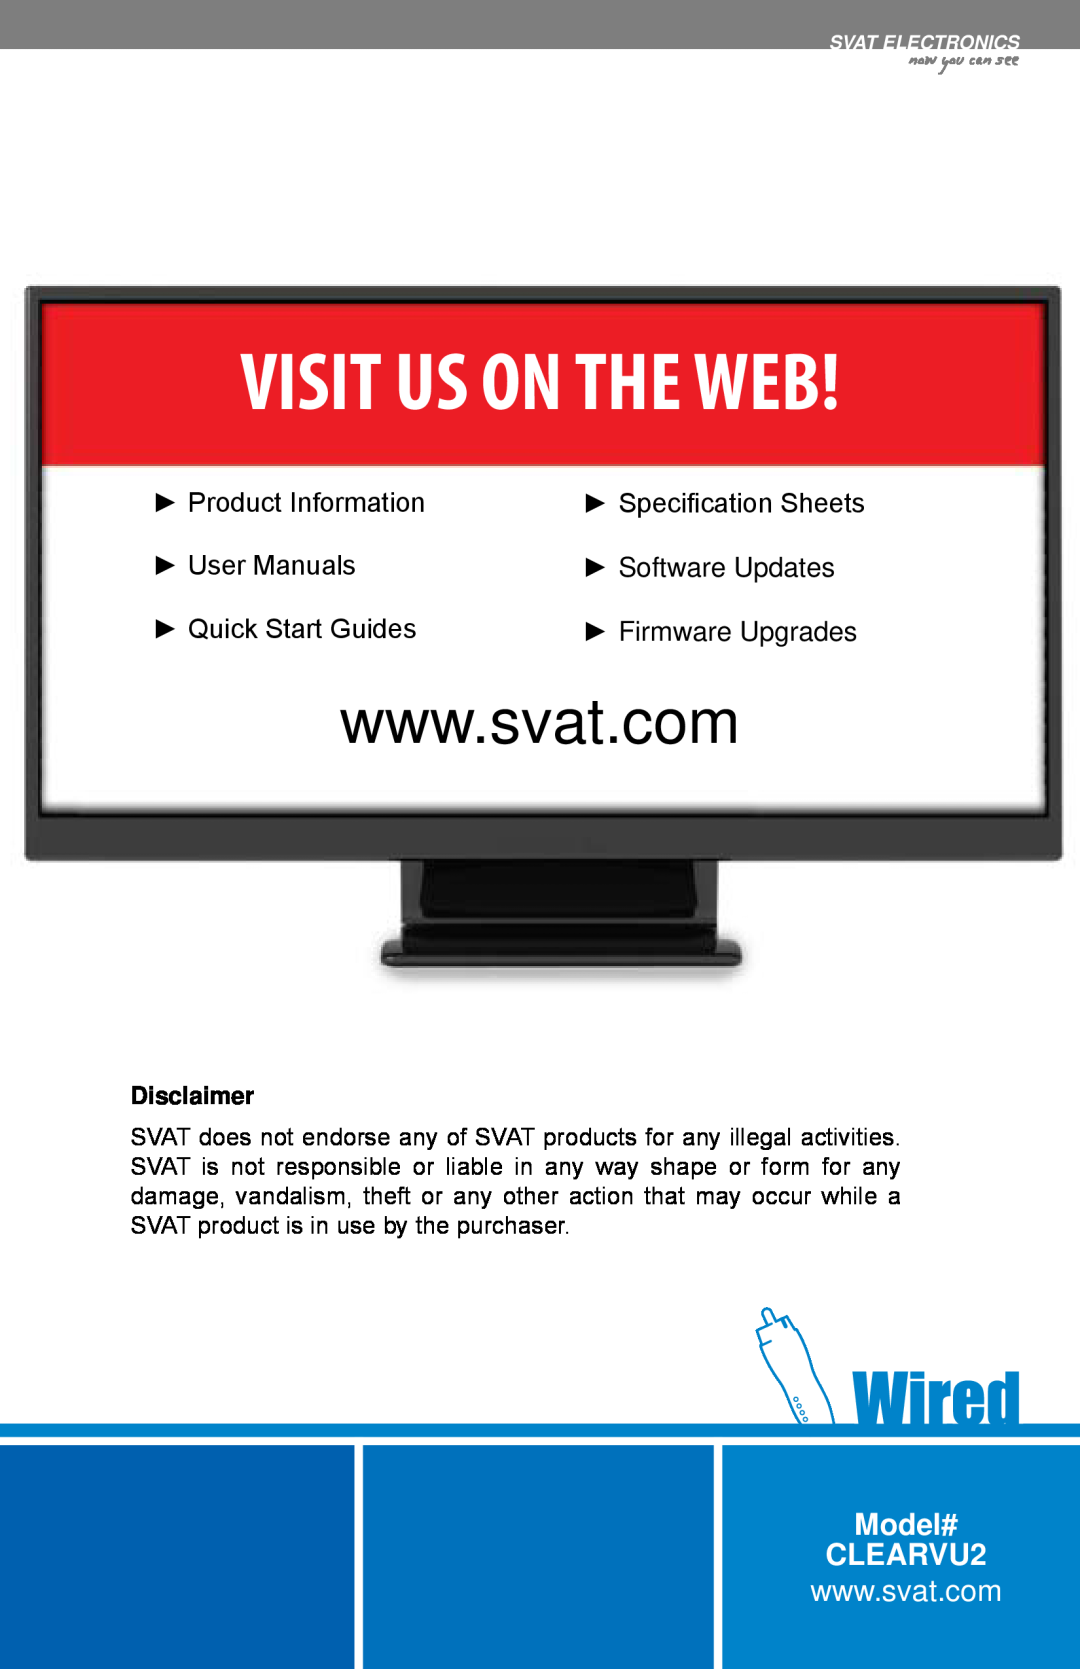 SVAT Electronics Product Information, Specification Sheets, Software Updates, Quick Start Guides, Model# CLEARVU2 